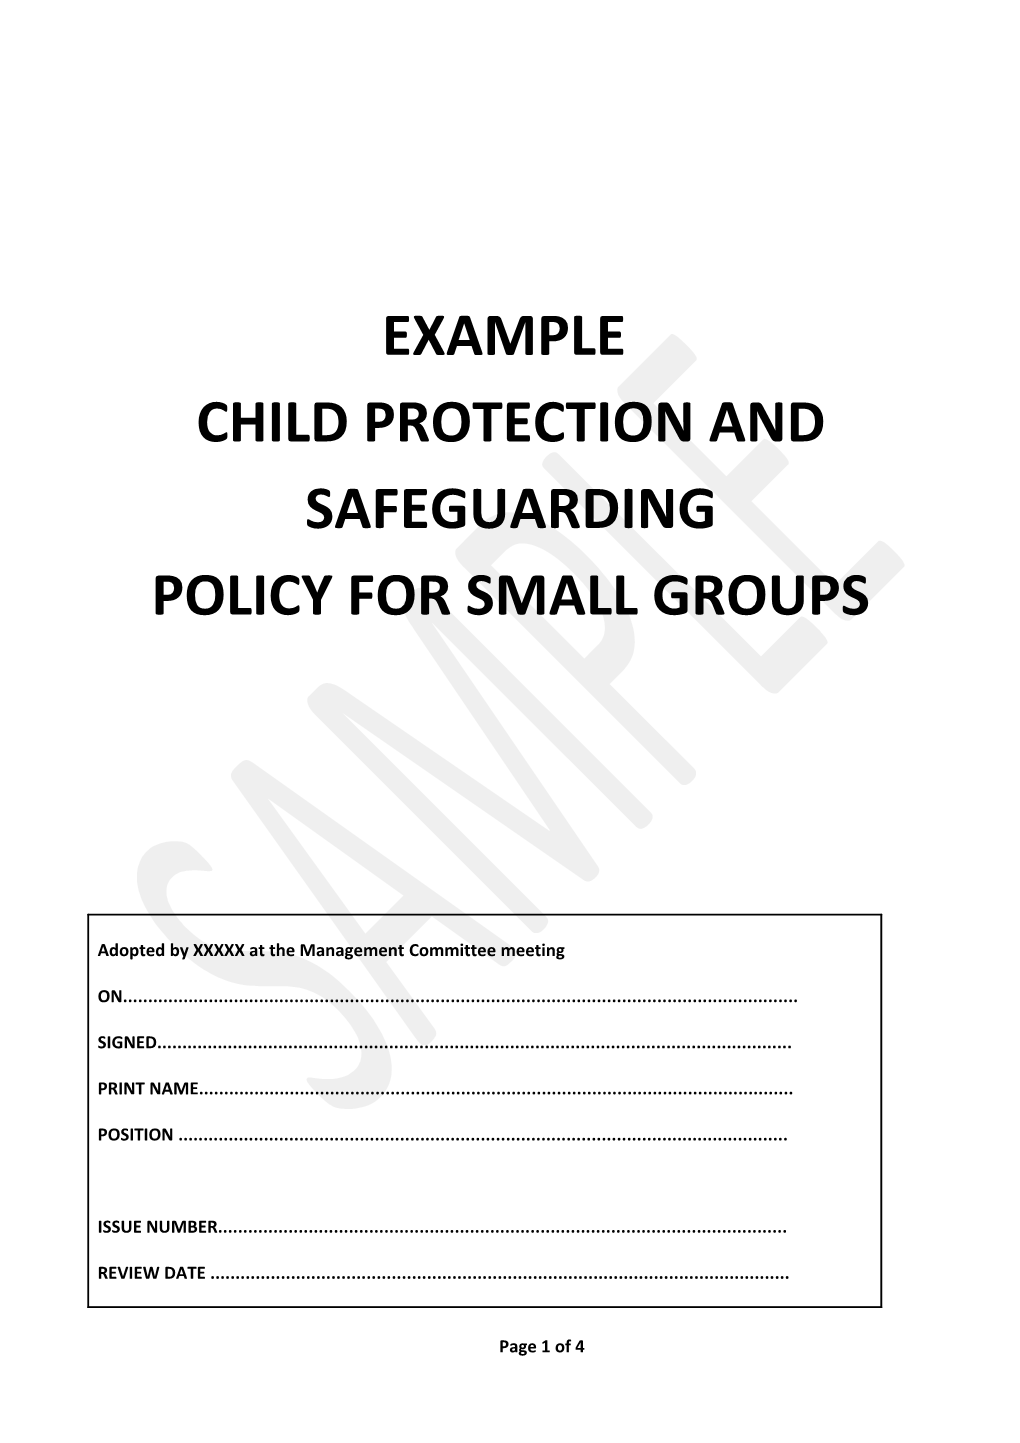 Policy for Small Groups